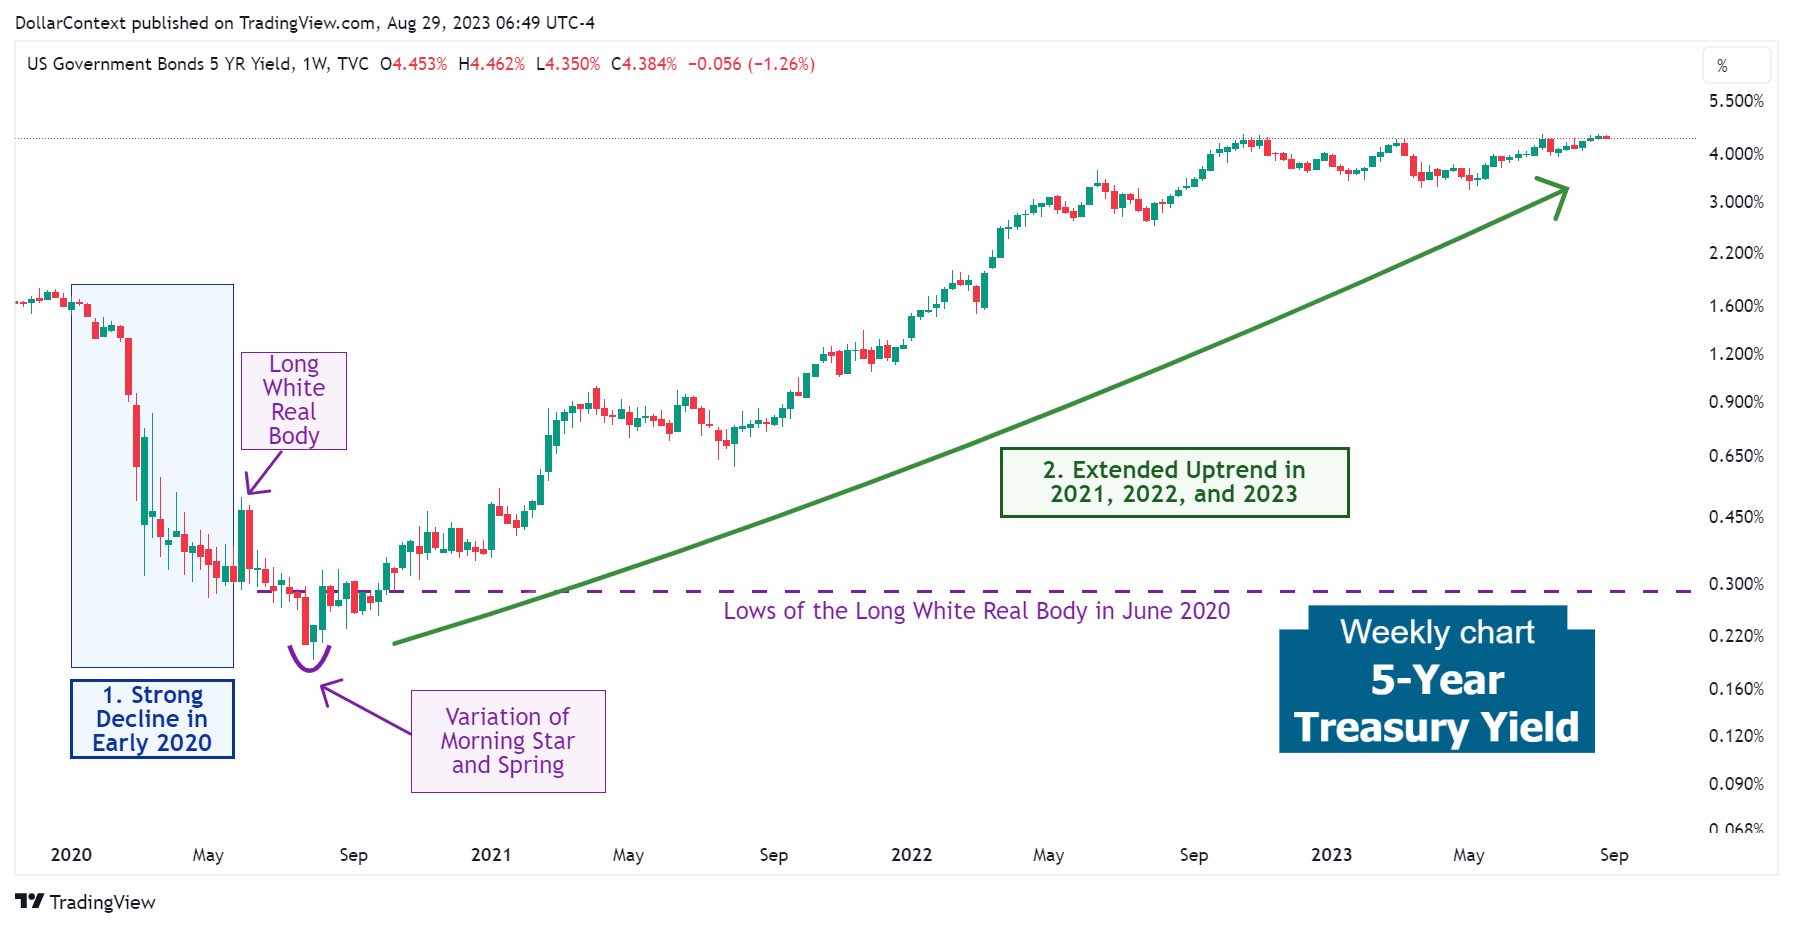 5-Year Treasury Yield: The Continuous Uptrend from October 2020 to August 2023 (Weekly Chart)